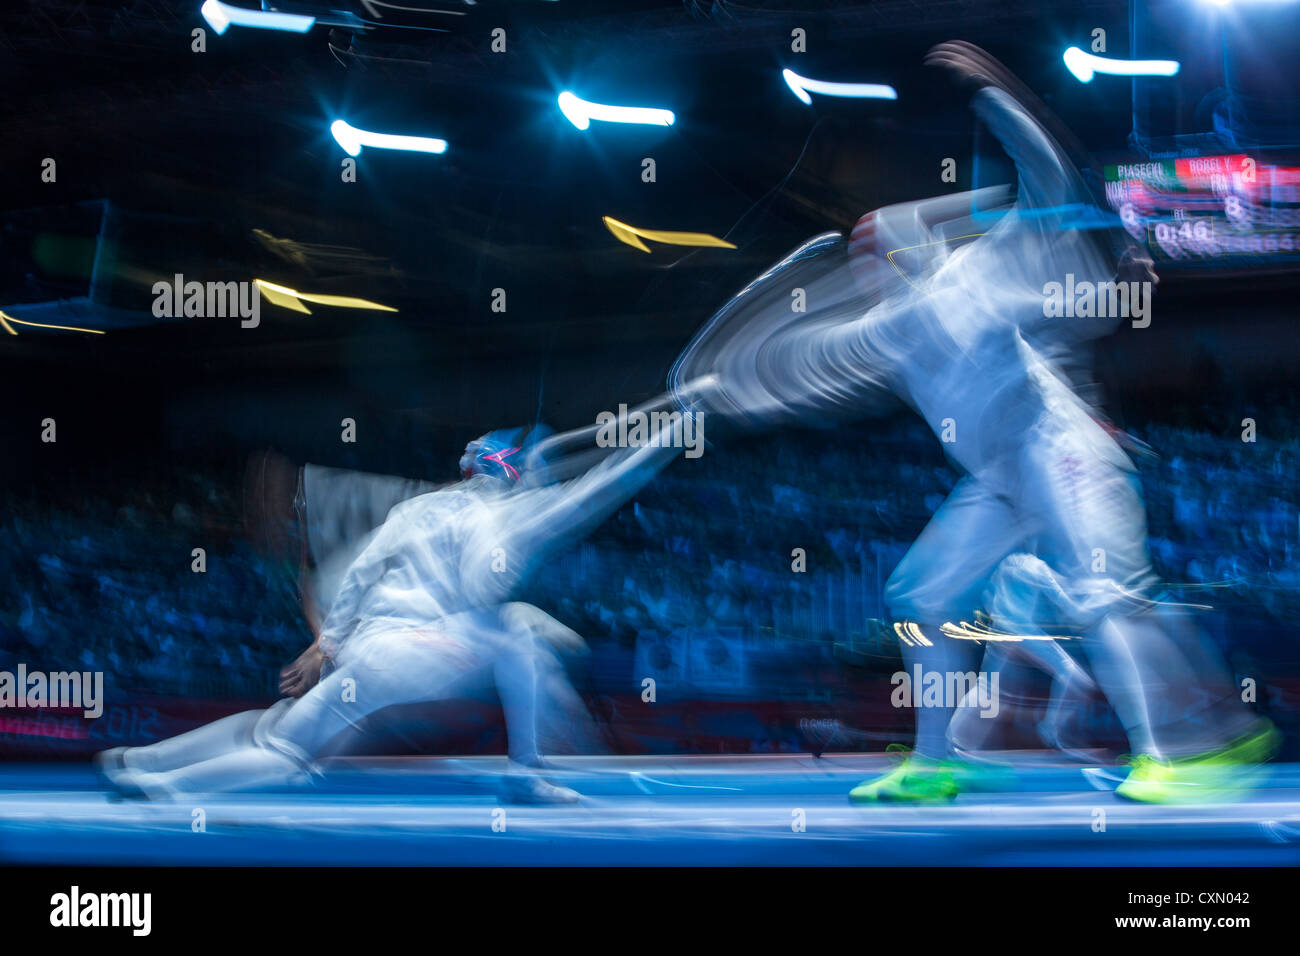 Blurred action of fencing competition. Stock Photo